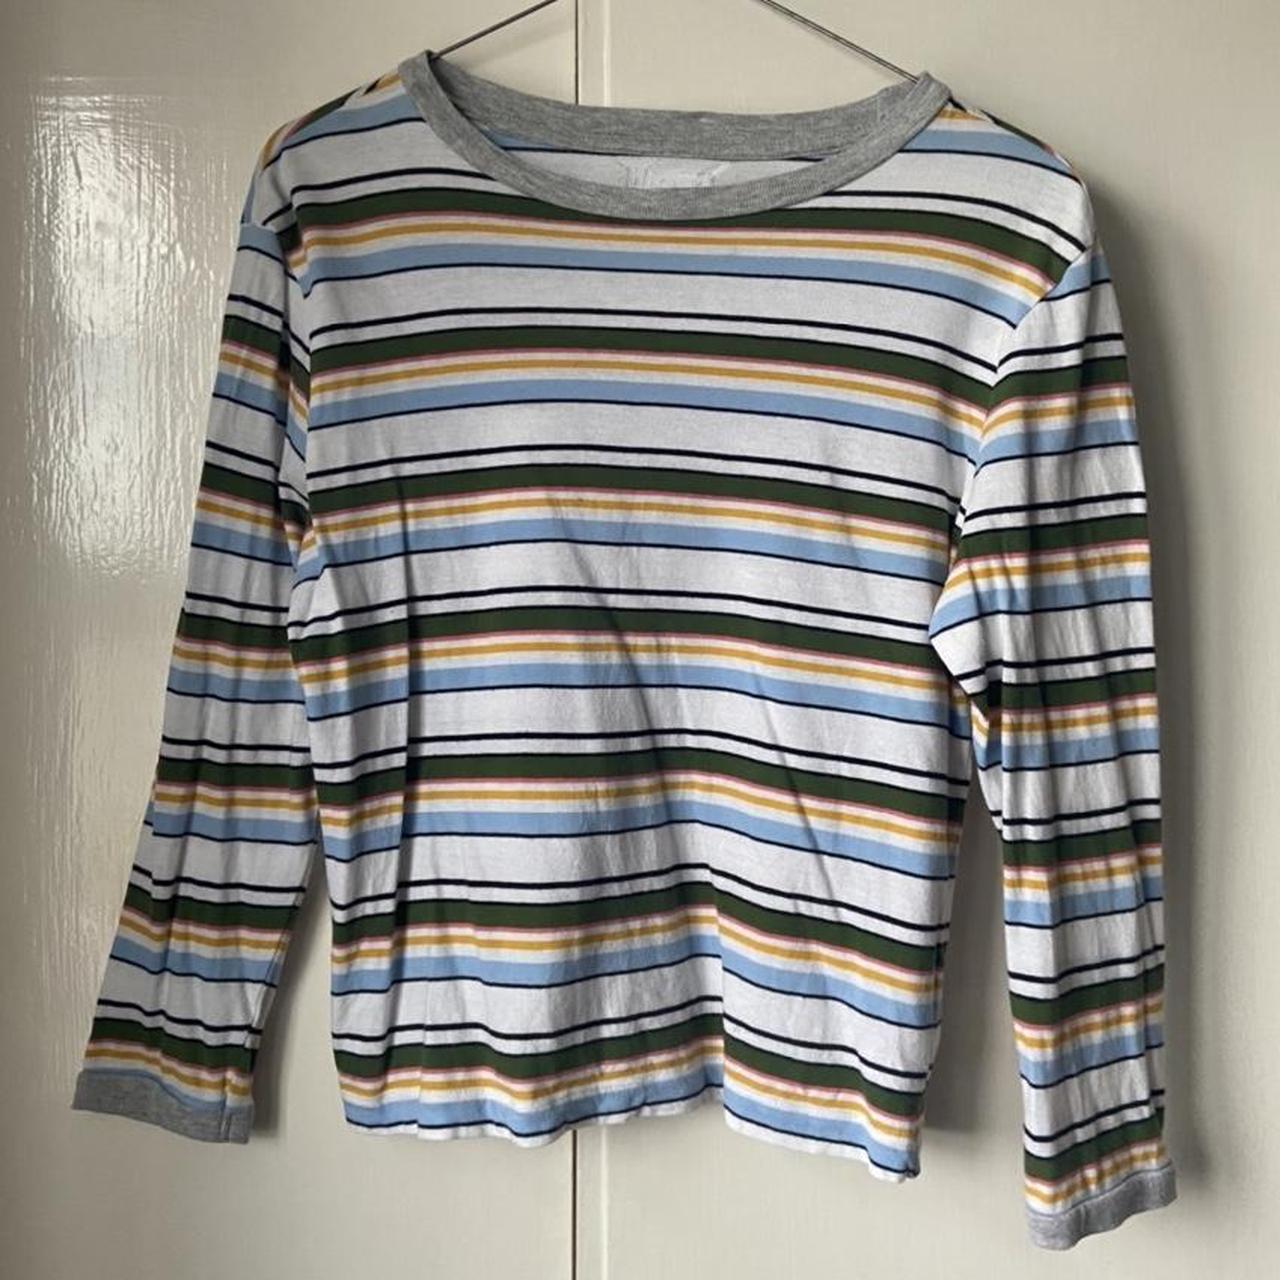 Urban Outfitters - Cooperative coloured striped top.... - Depop